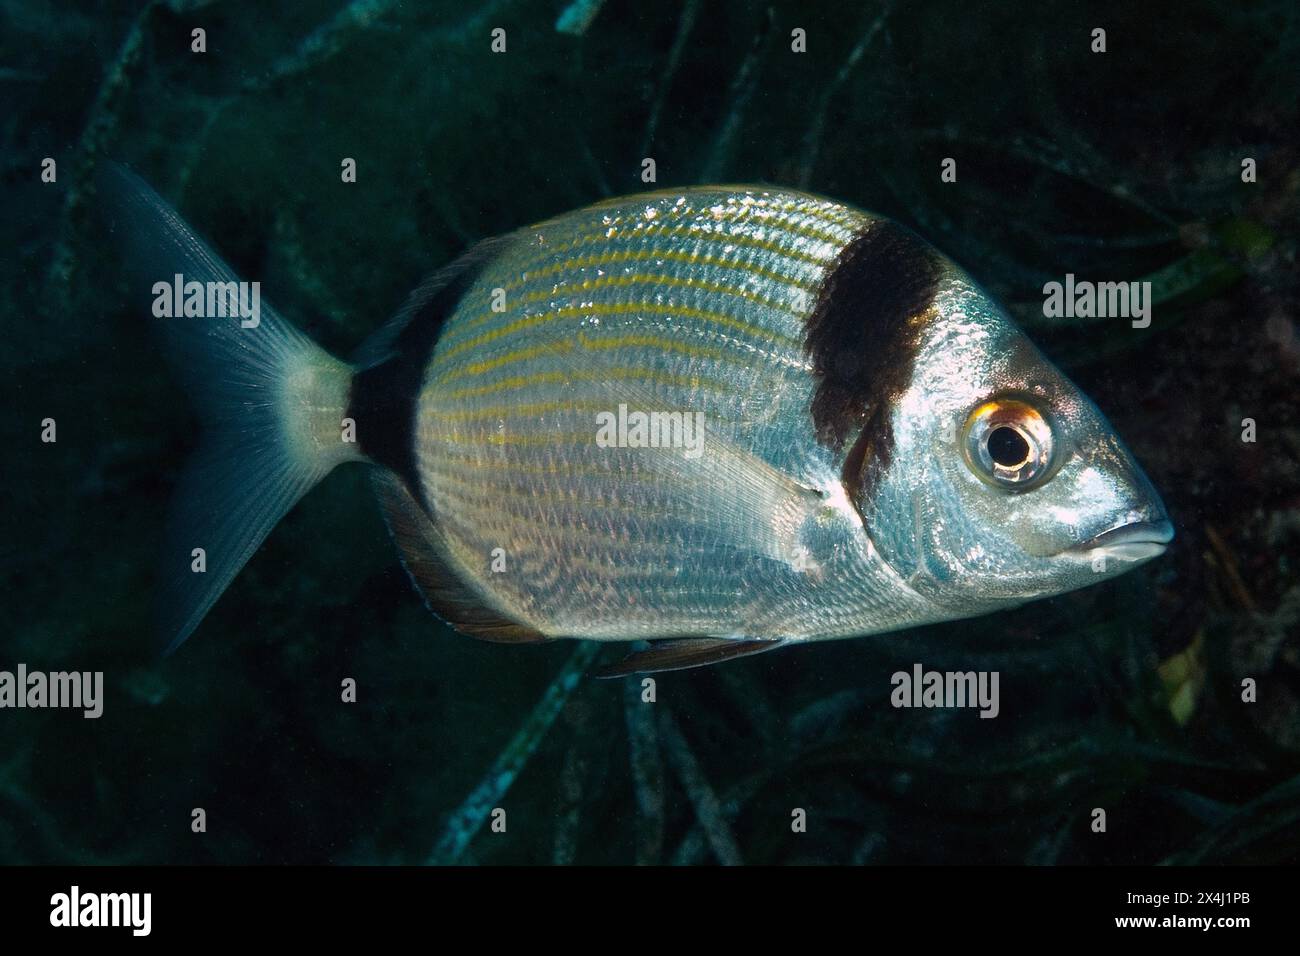 Close-up of Common two-banded seabream (Diplodus vulgaris) in the open sea wild, food fish, Mediterranean Sea Stock Photo